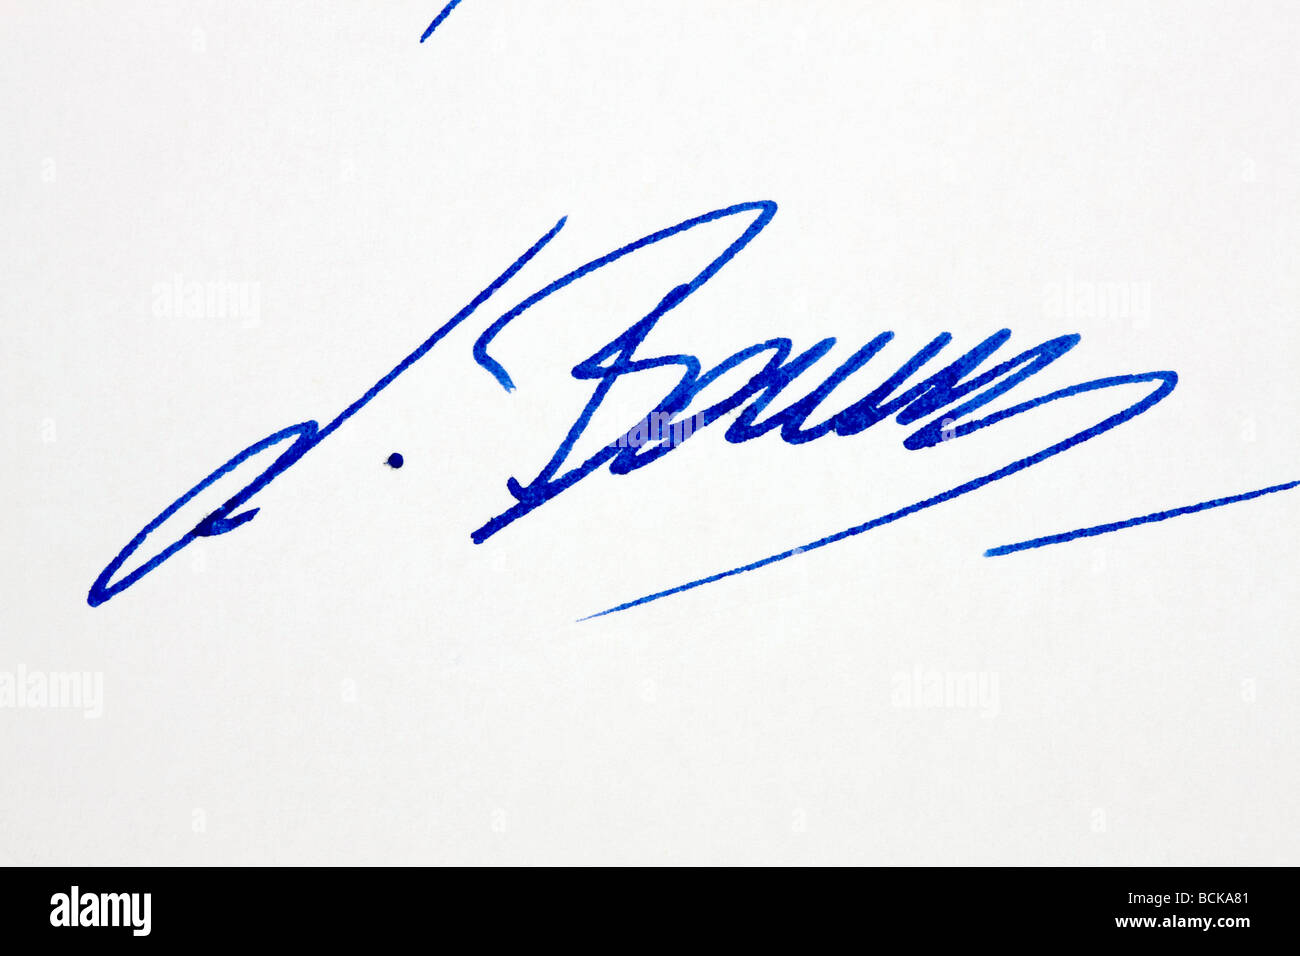 Signature on a hand written document or letter Stock Photo